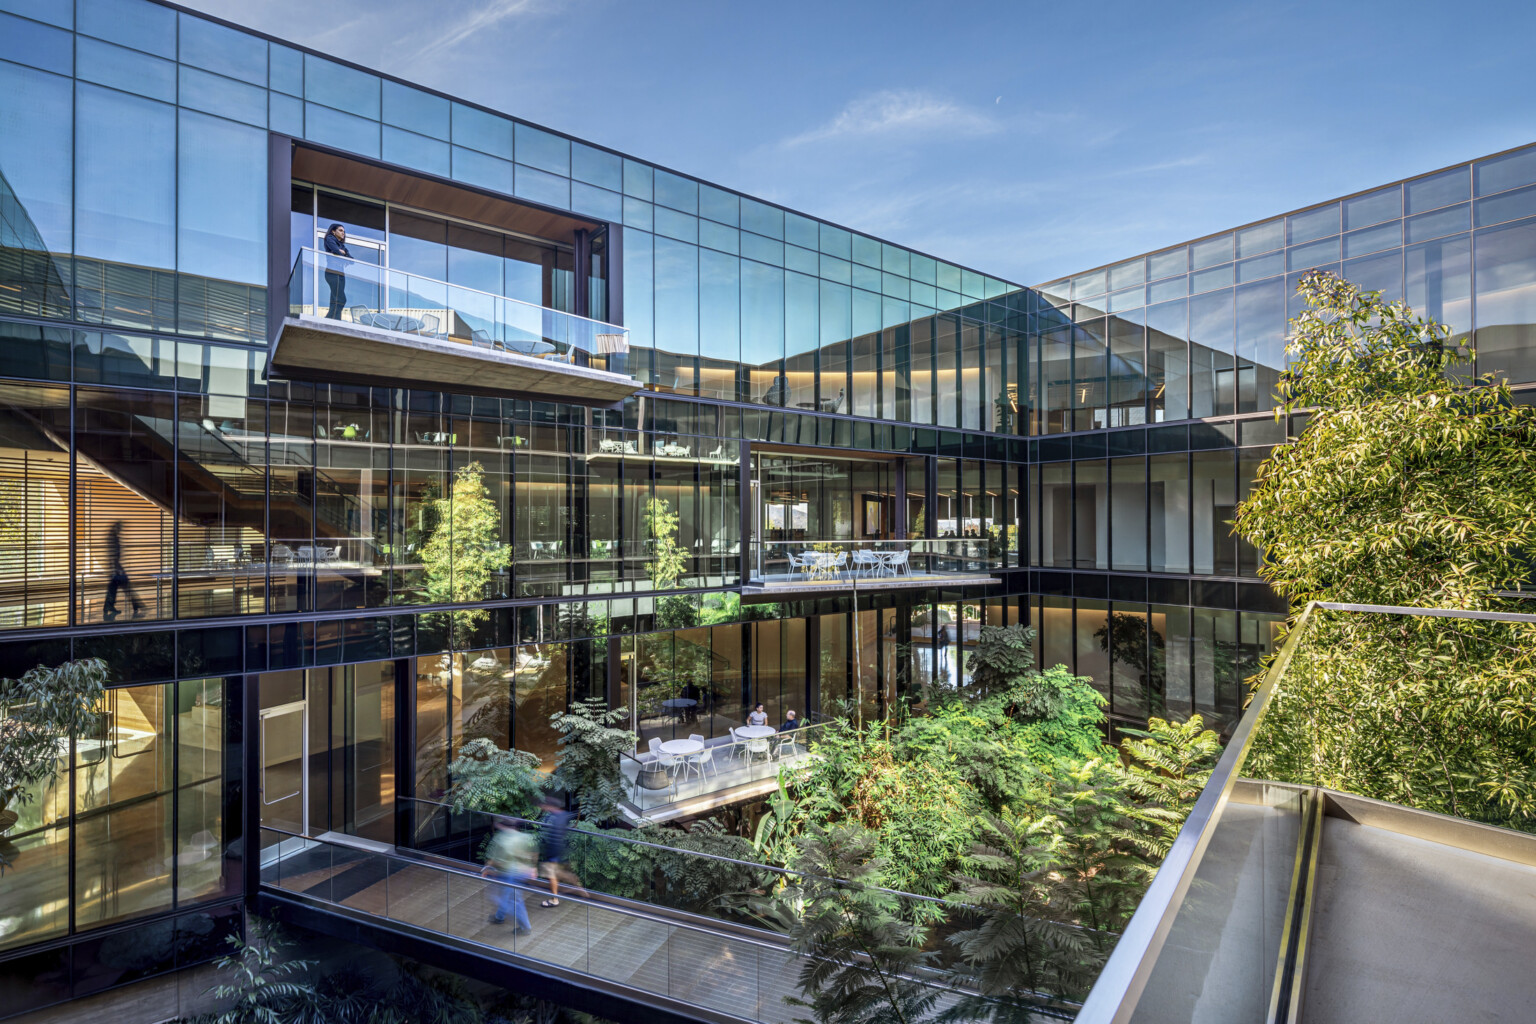 ESRI office workplace design with glass facade and biophilia greenery